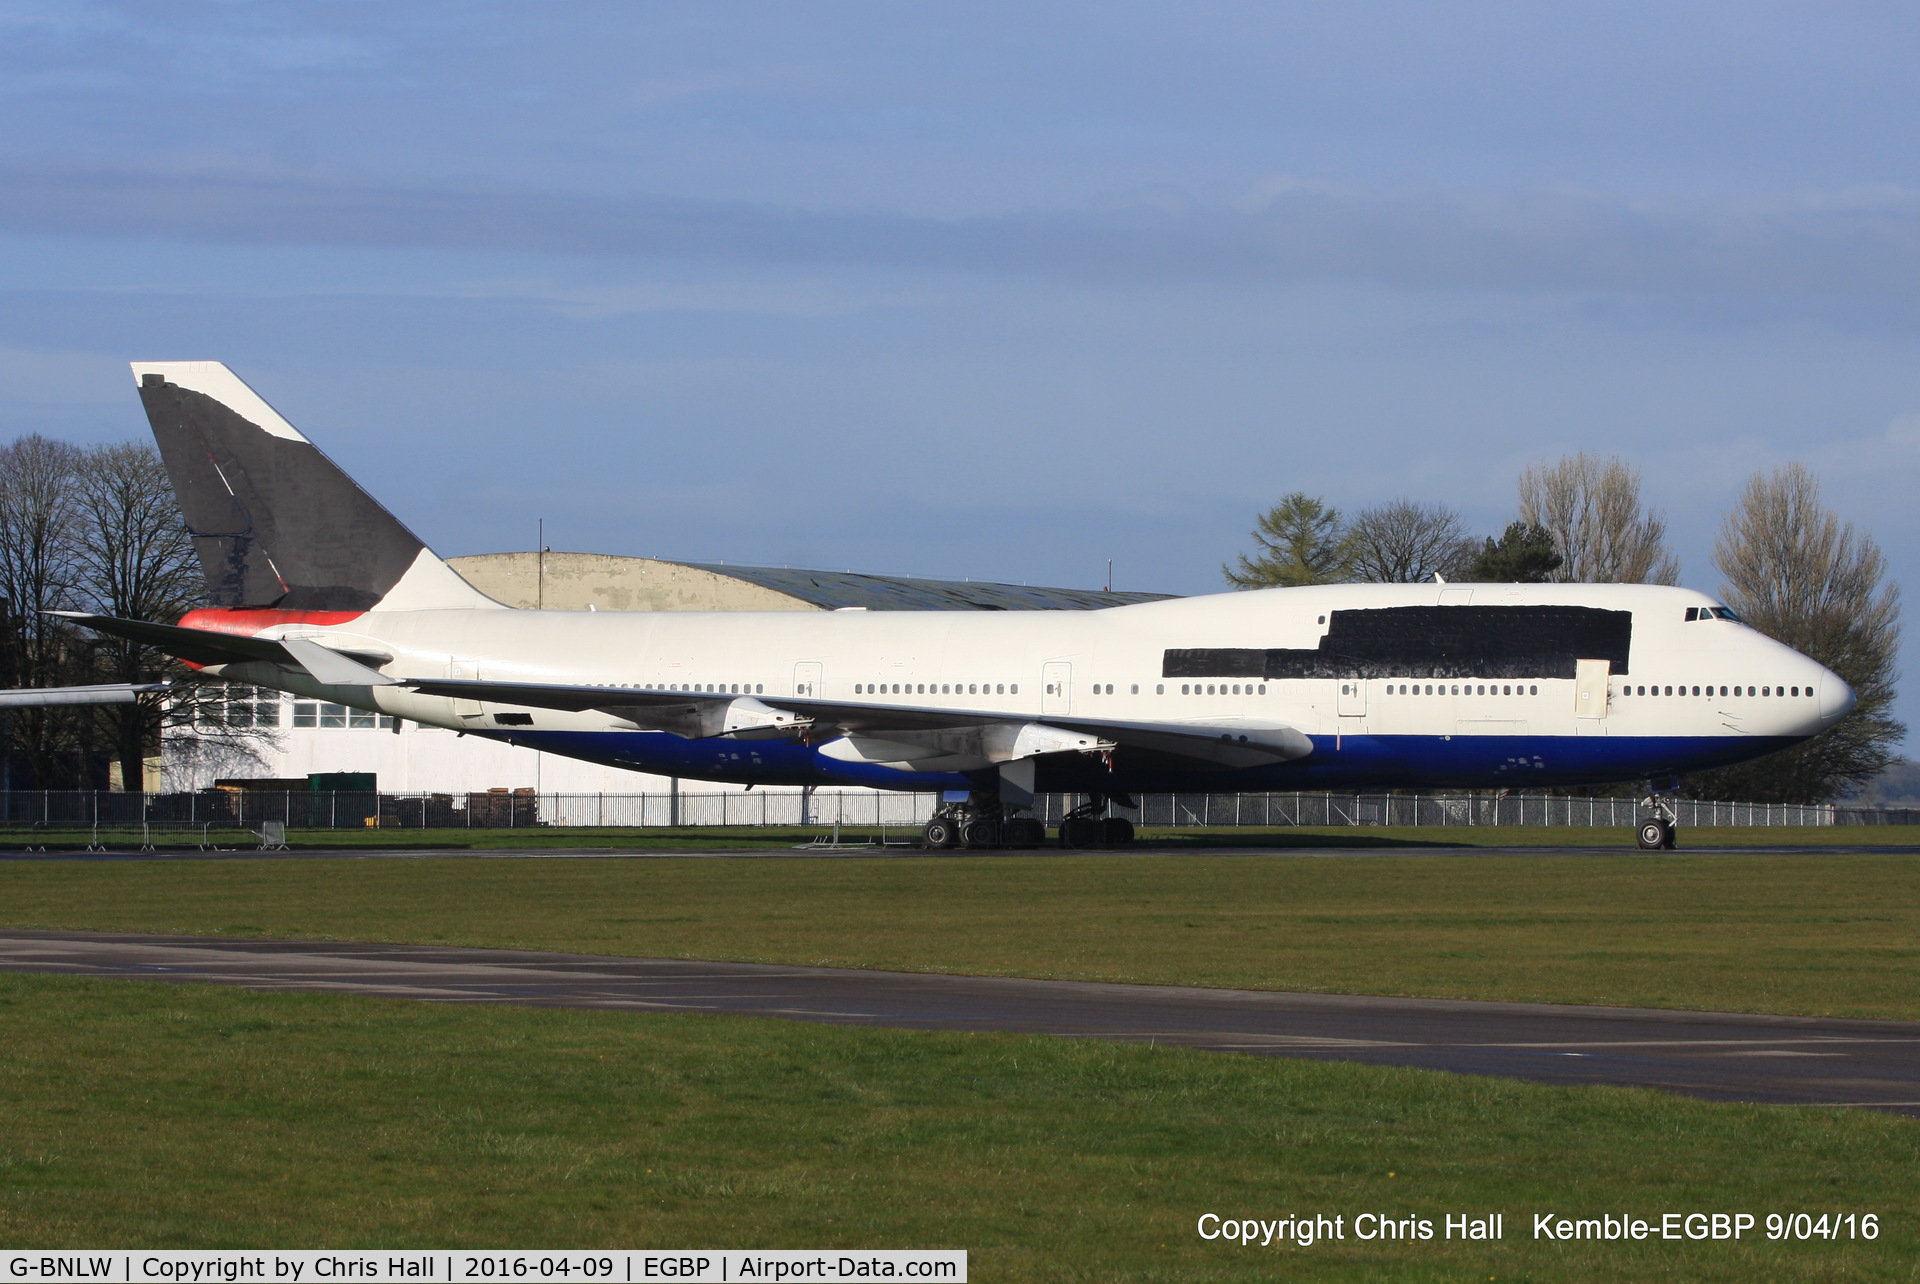 G-BNLW, 1992 Boeing 747-436 C/N 25432, stored at Kemble